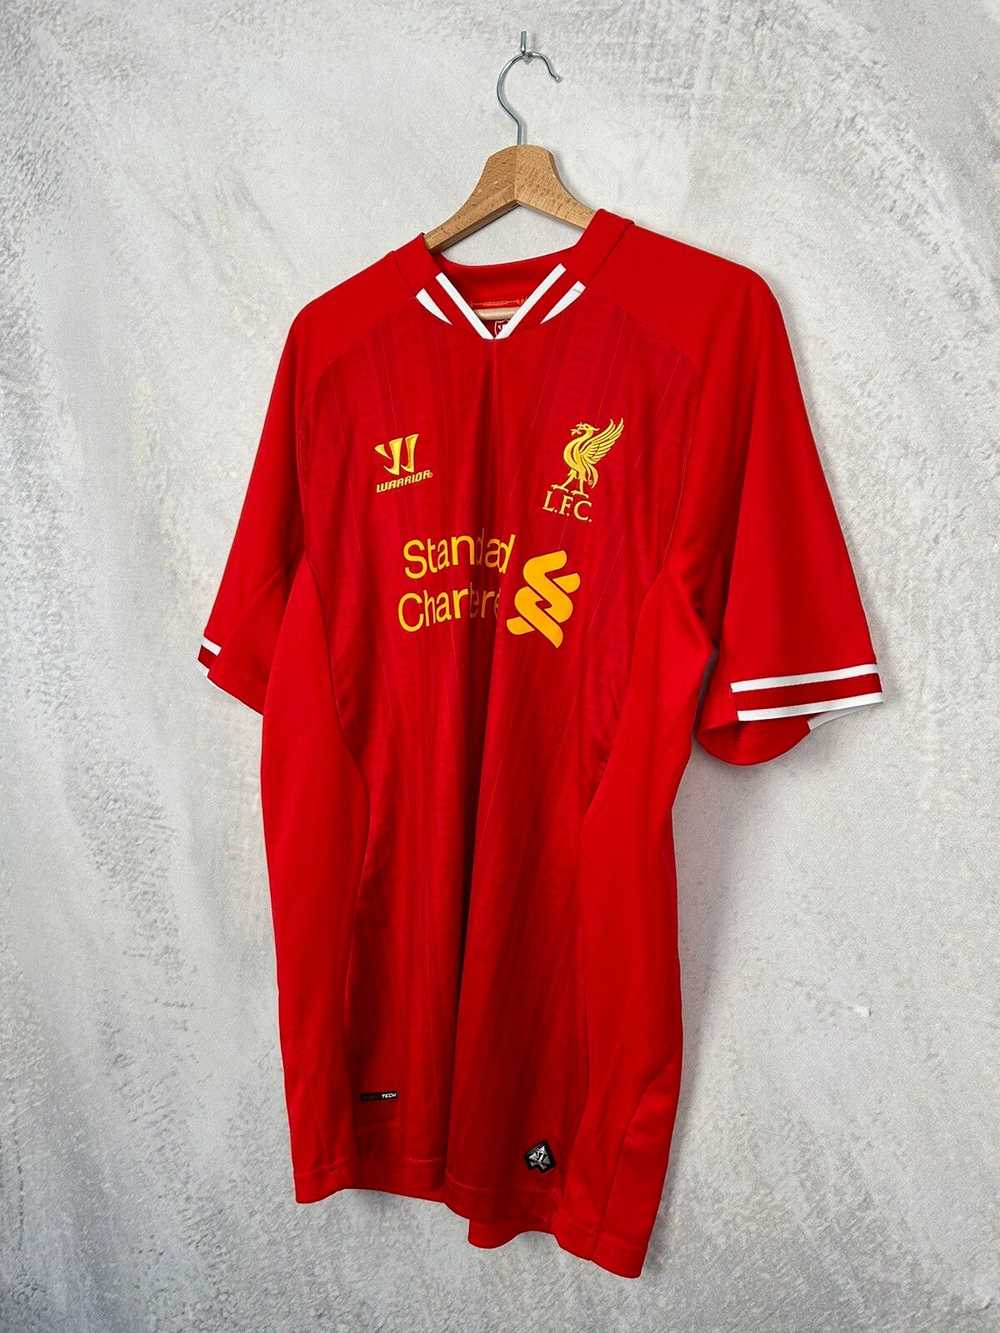 Liverpool × Soccer Jersey Liverpool FC Soccer Jer… - image 2